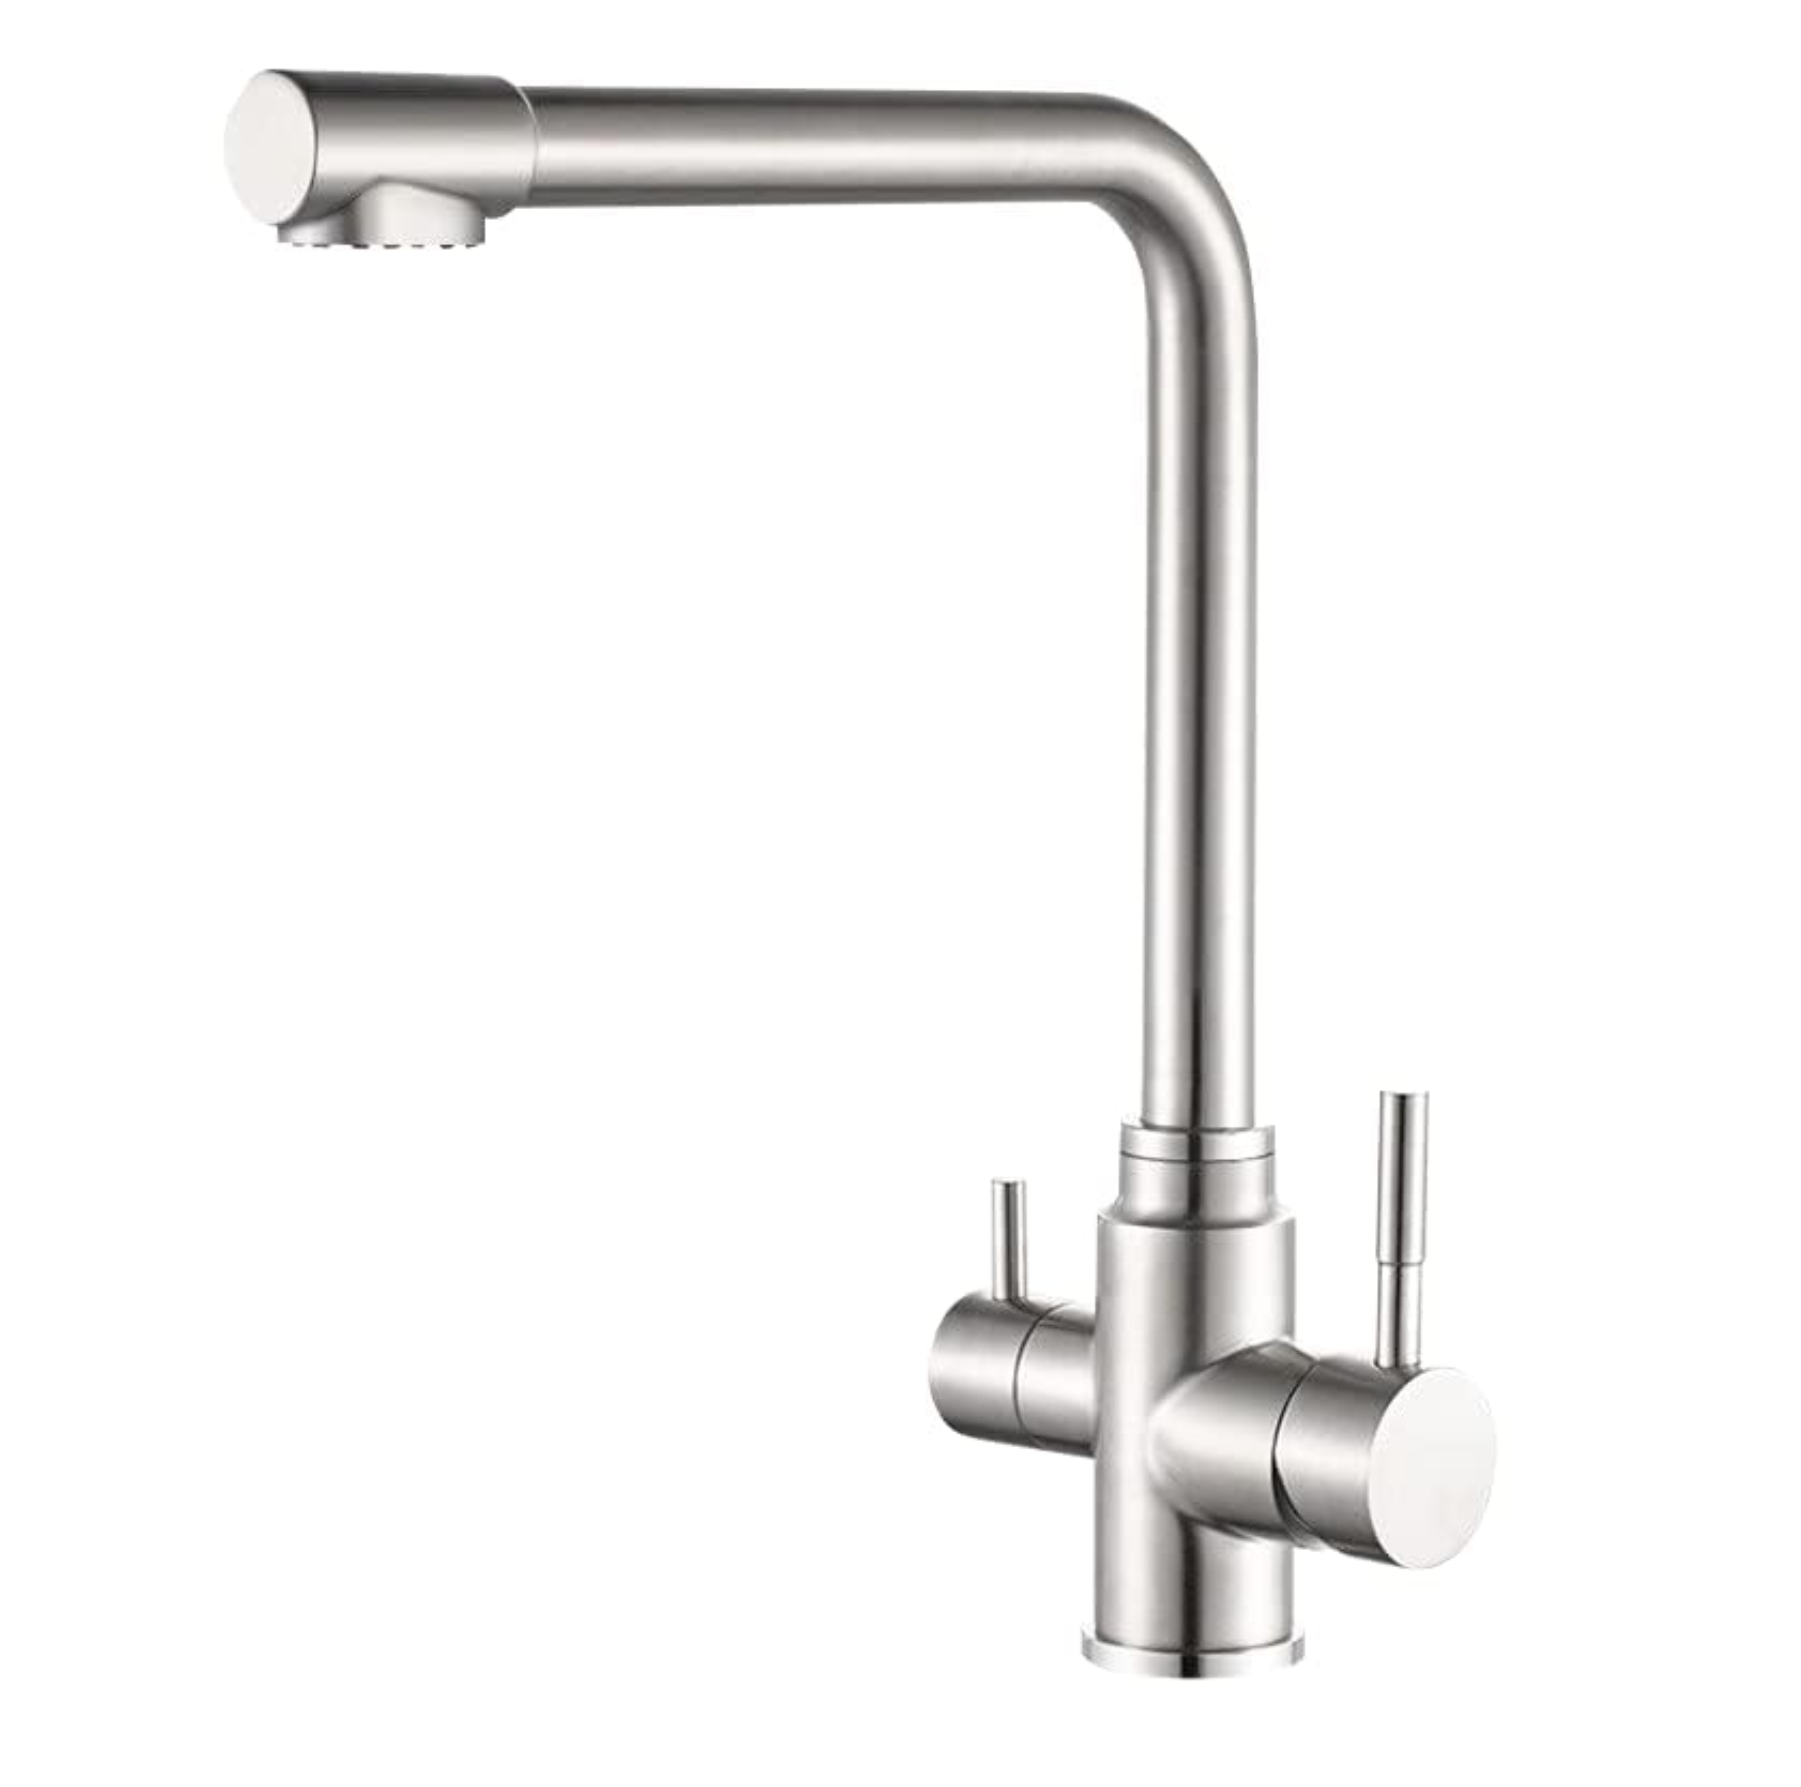 Fossa 3 Way Kitchen Mixer Taps with Drinking Water Filter Tap, Solid Stainless Steel Dual Handle Cold and Hot Water Kitchen Mixer Fossa Home